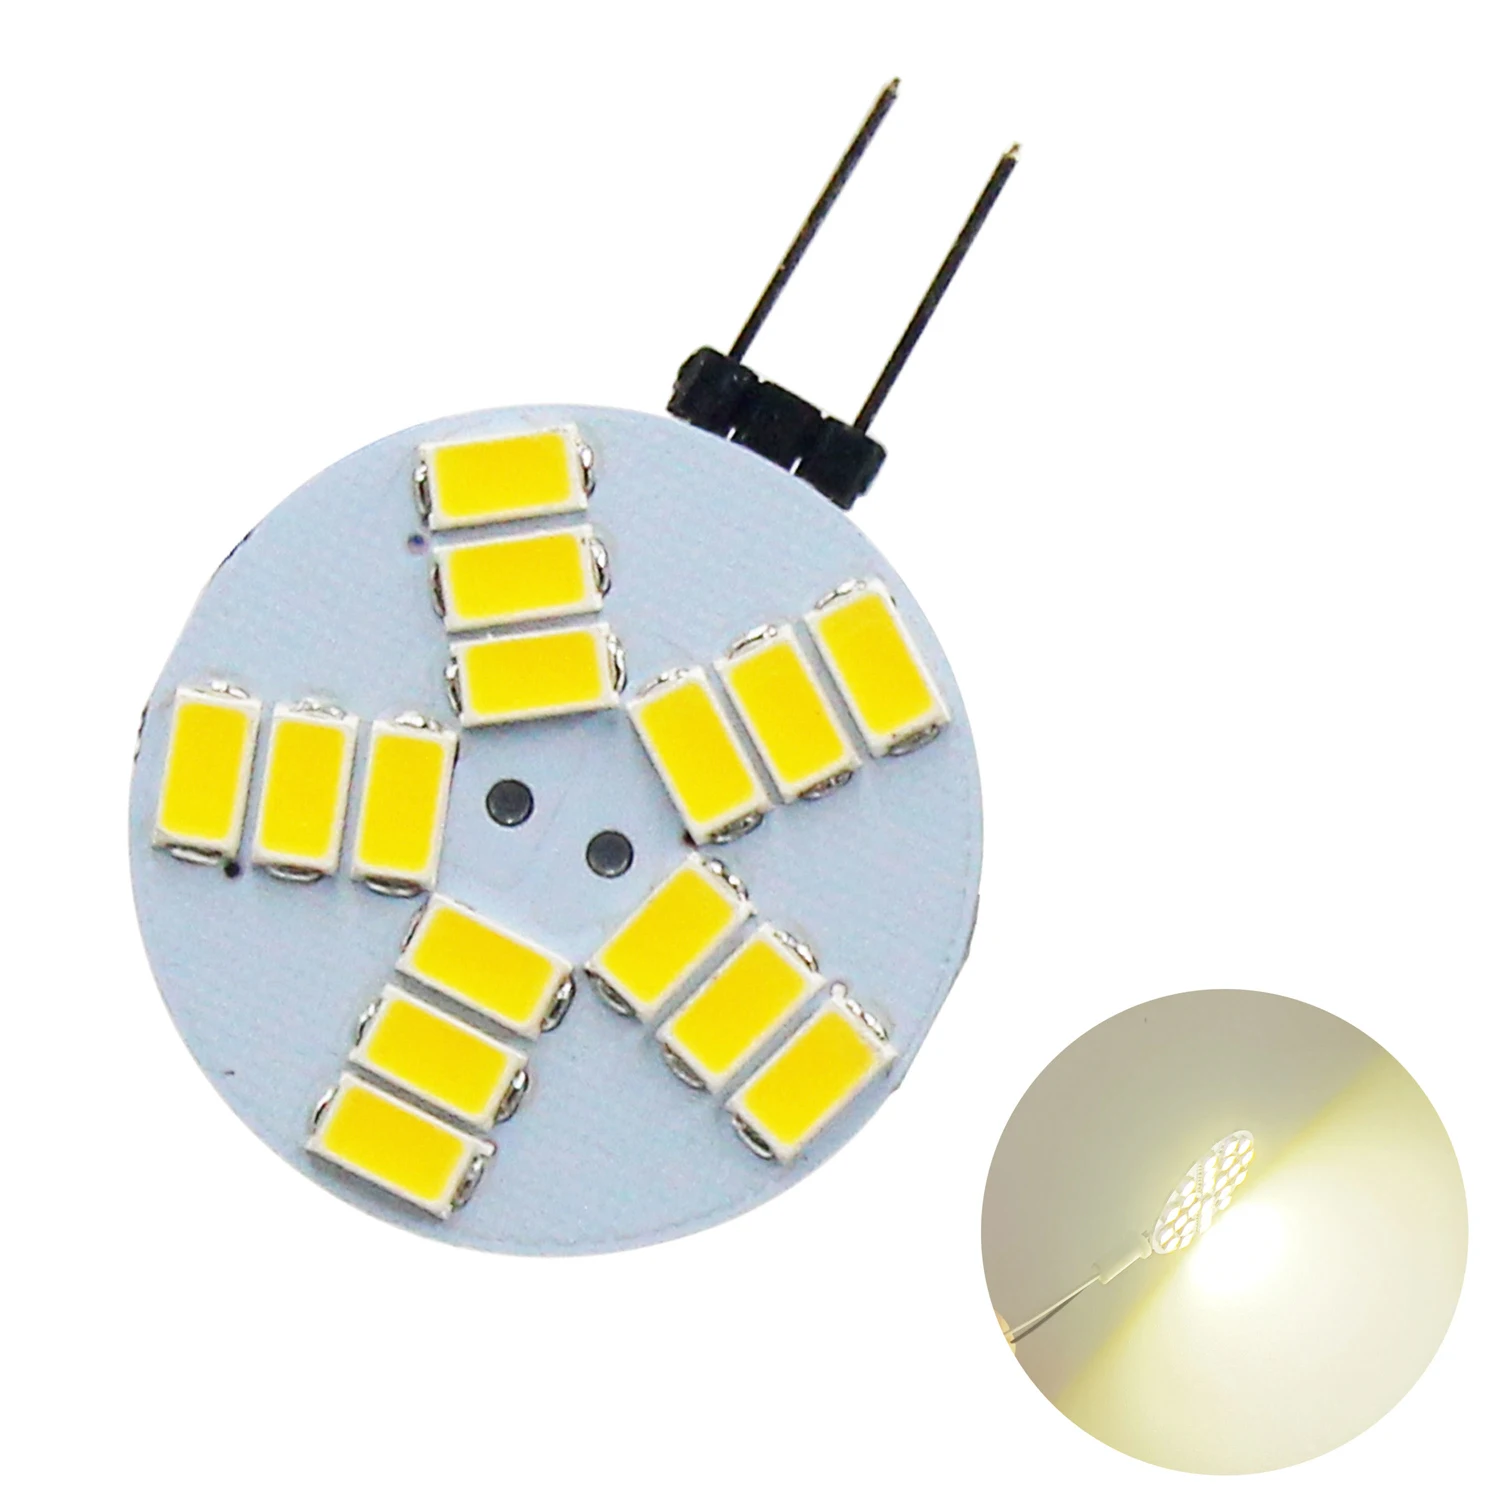 

G4 3W DC12V Input 15 5730 LED Chips SMD Replace Halogen Bi-Pin 180 Degrees Beam Angle LED Bulb Lamps